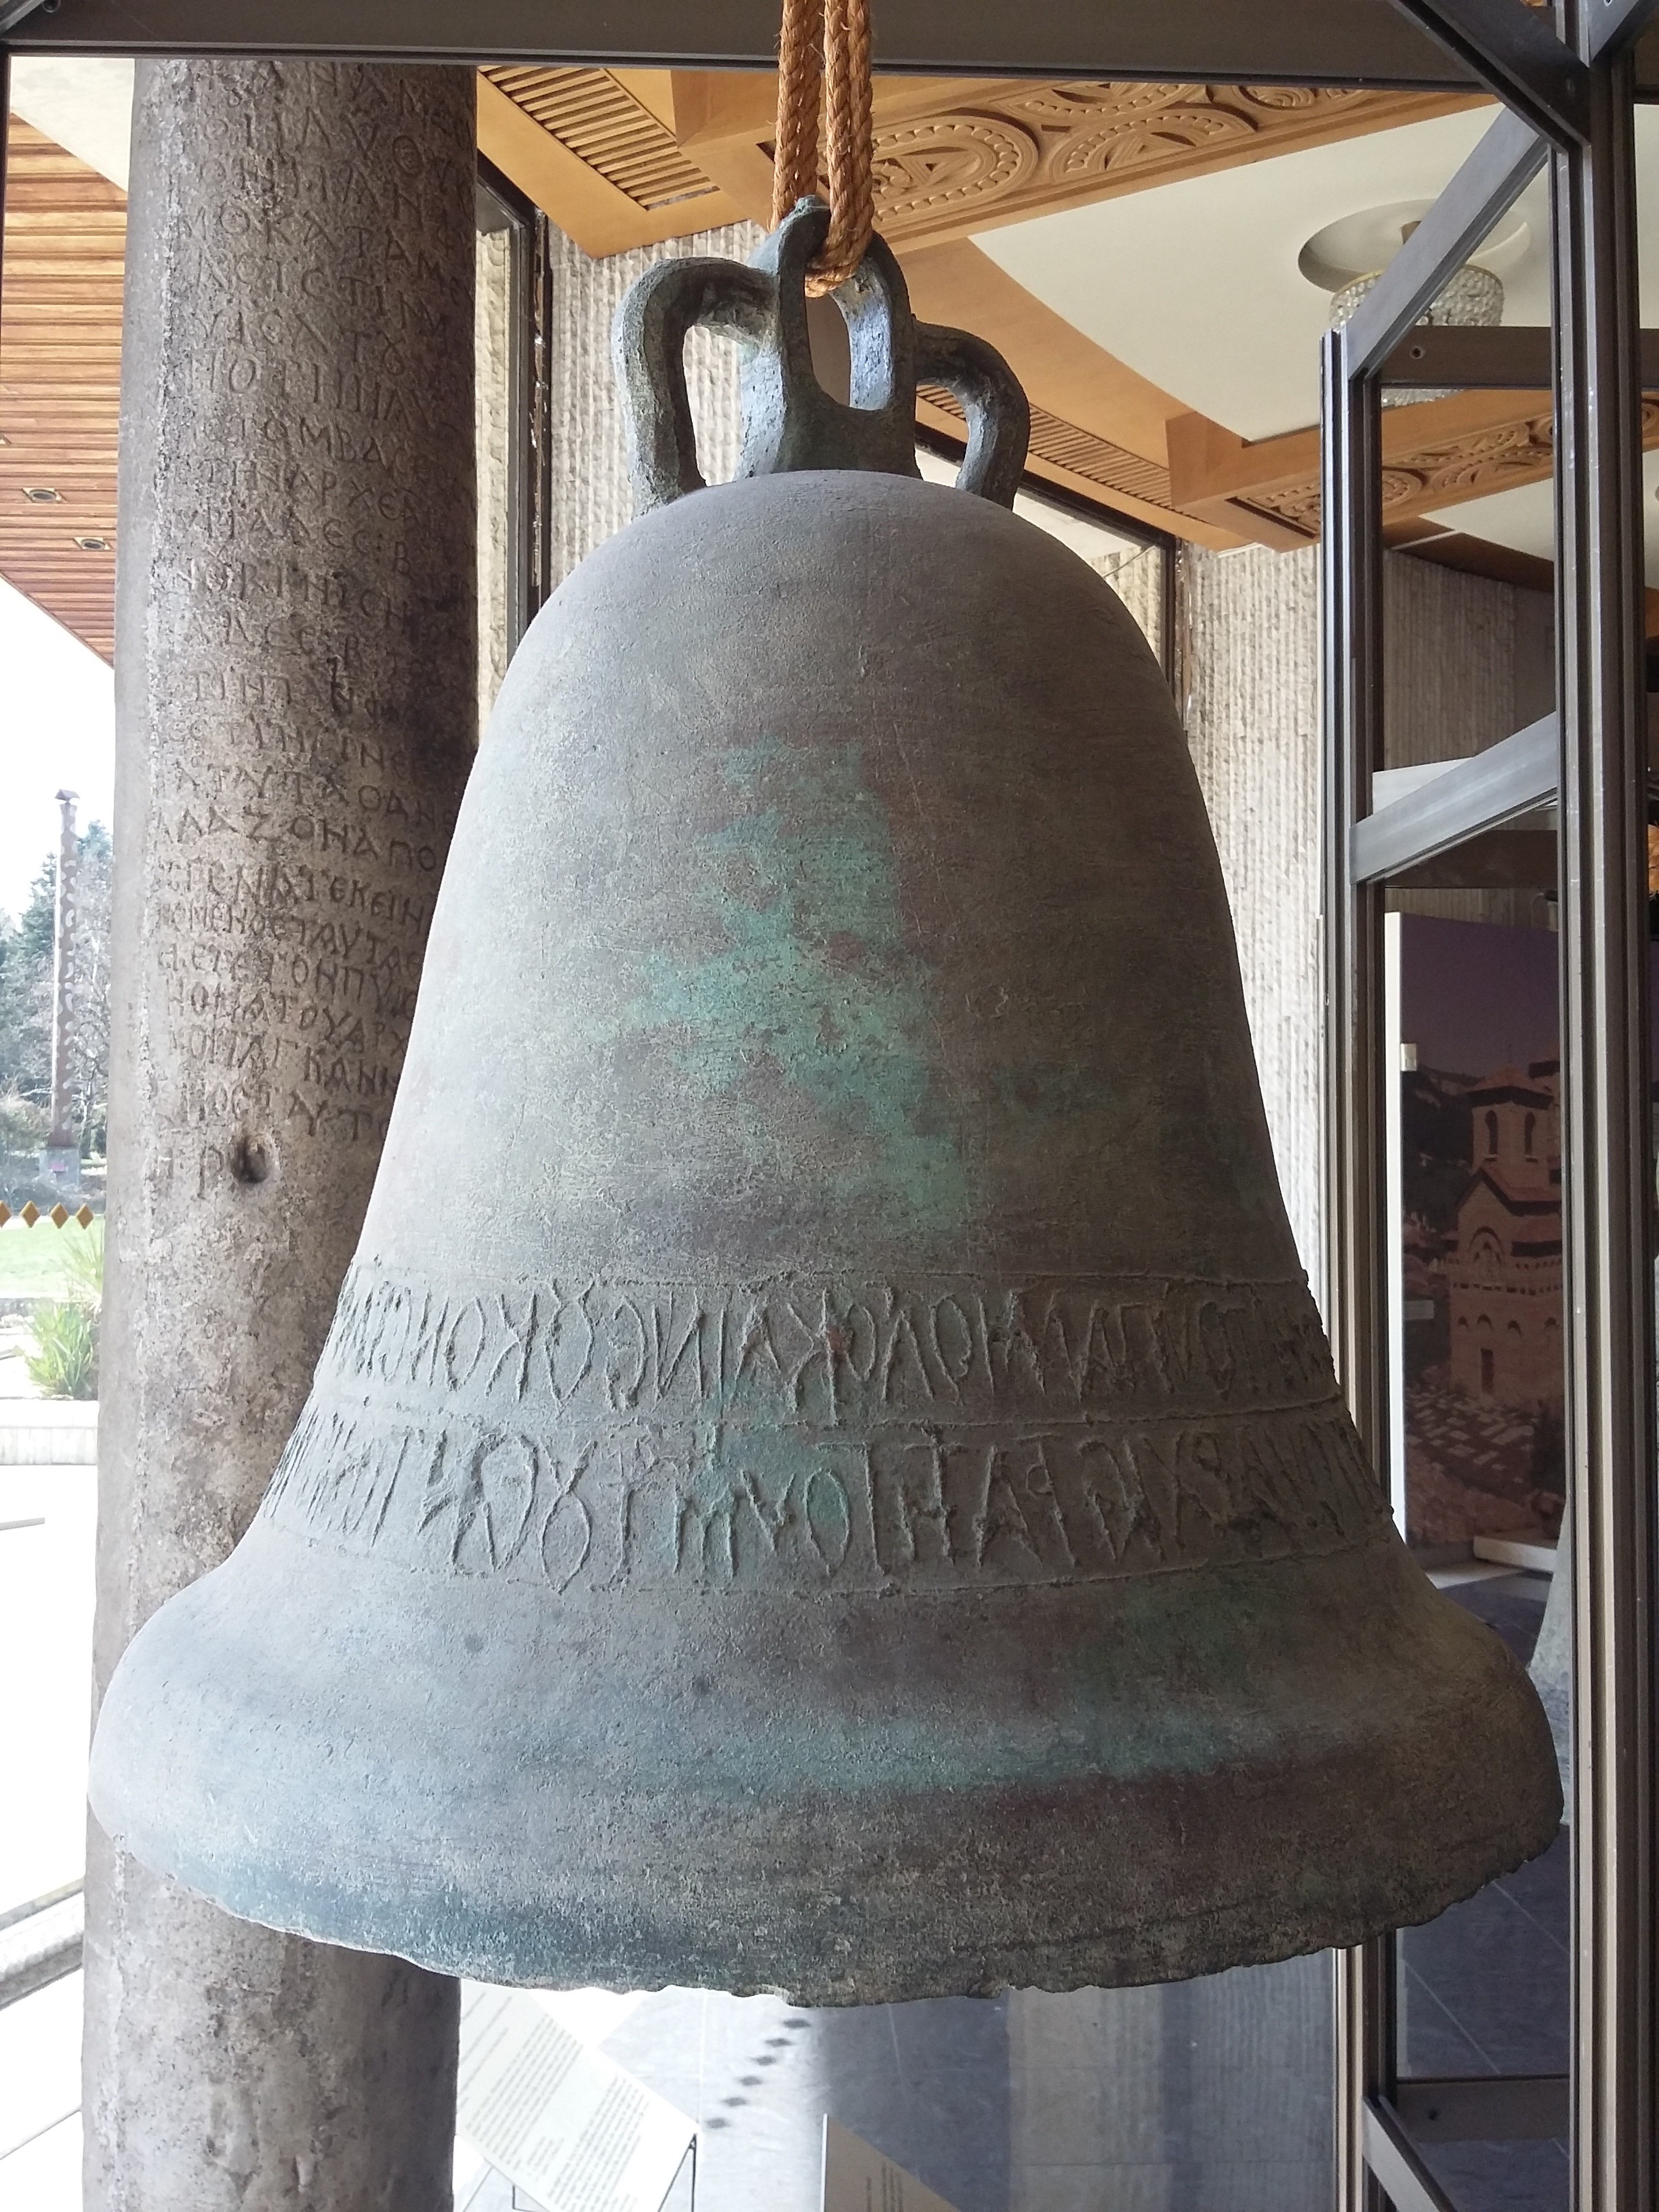 The Bell of Hieromonk Theodosios